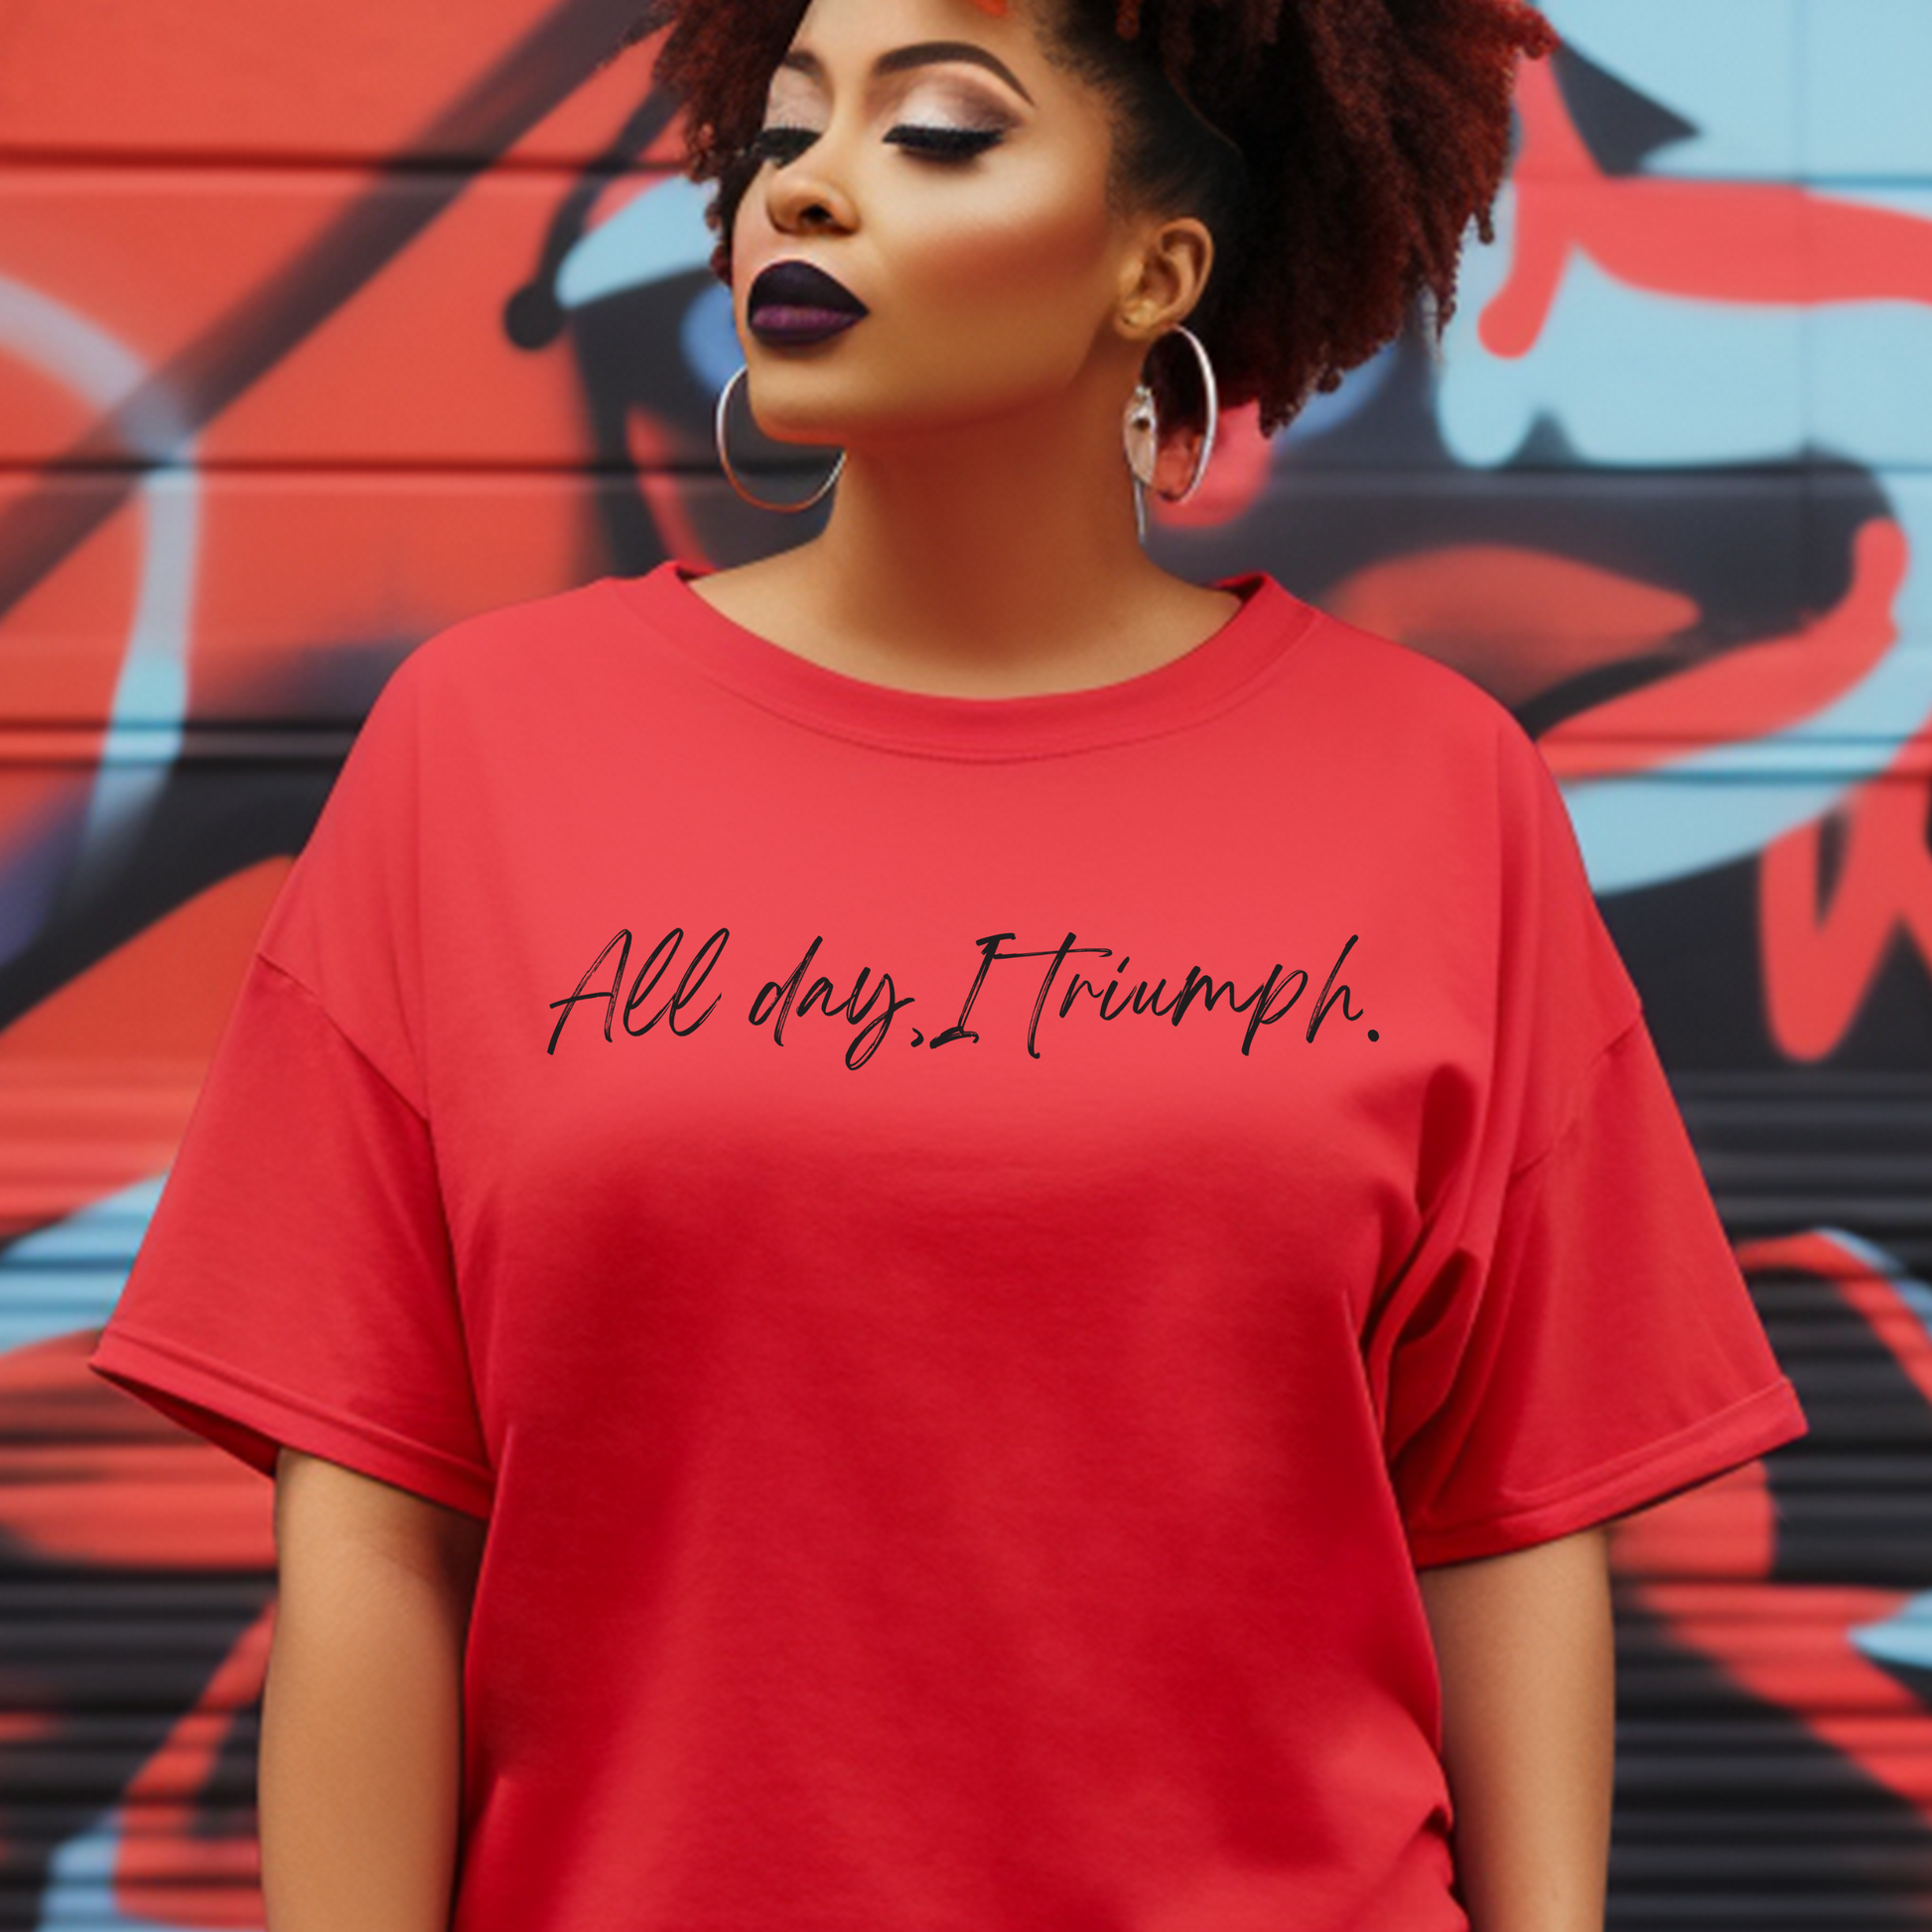 Bold red 'All Day I Triumph' t-shirt from Triumph Tees, designed to inspire faith and courage. Ideal faith apparel for those who believe they are empowered by God to overcome any adversity.